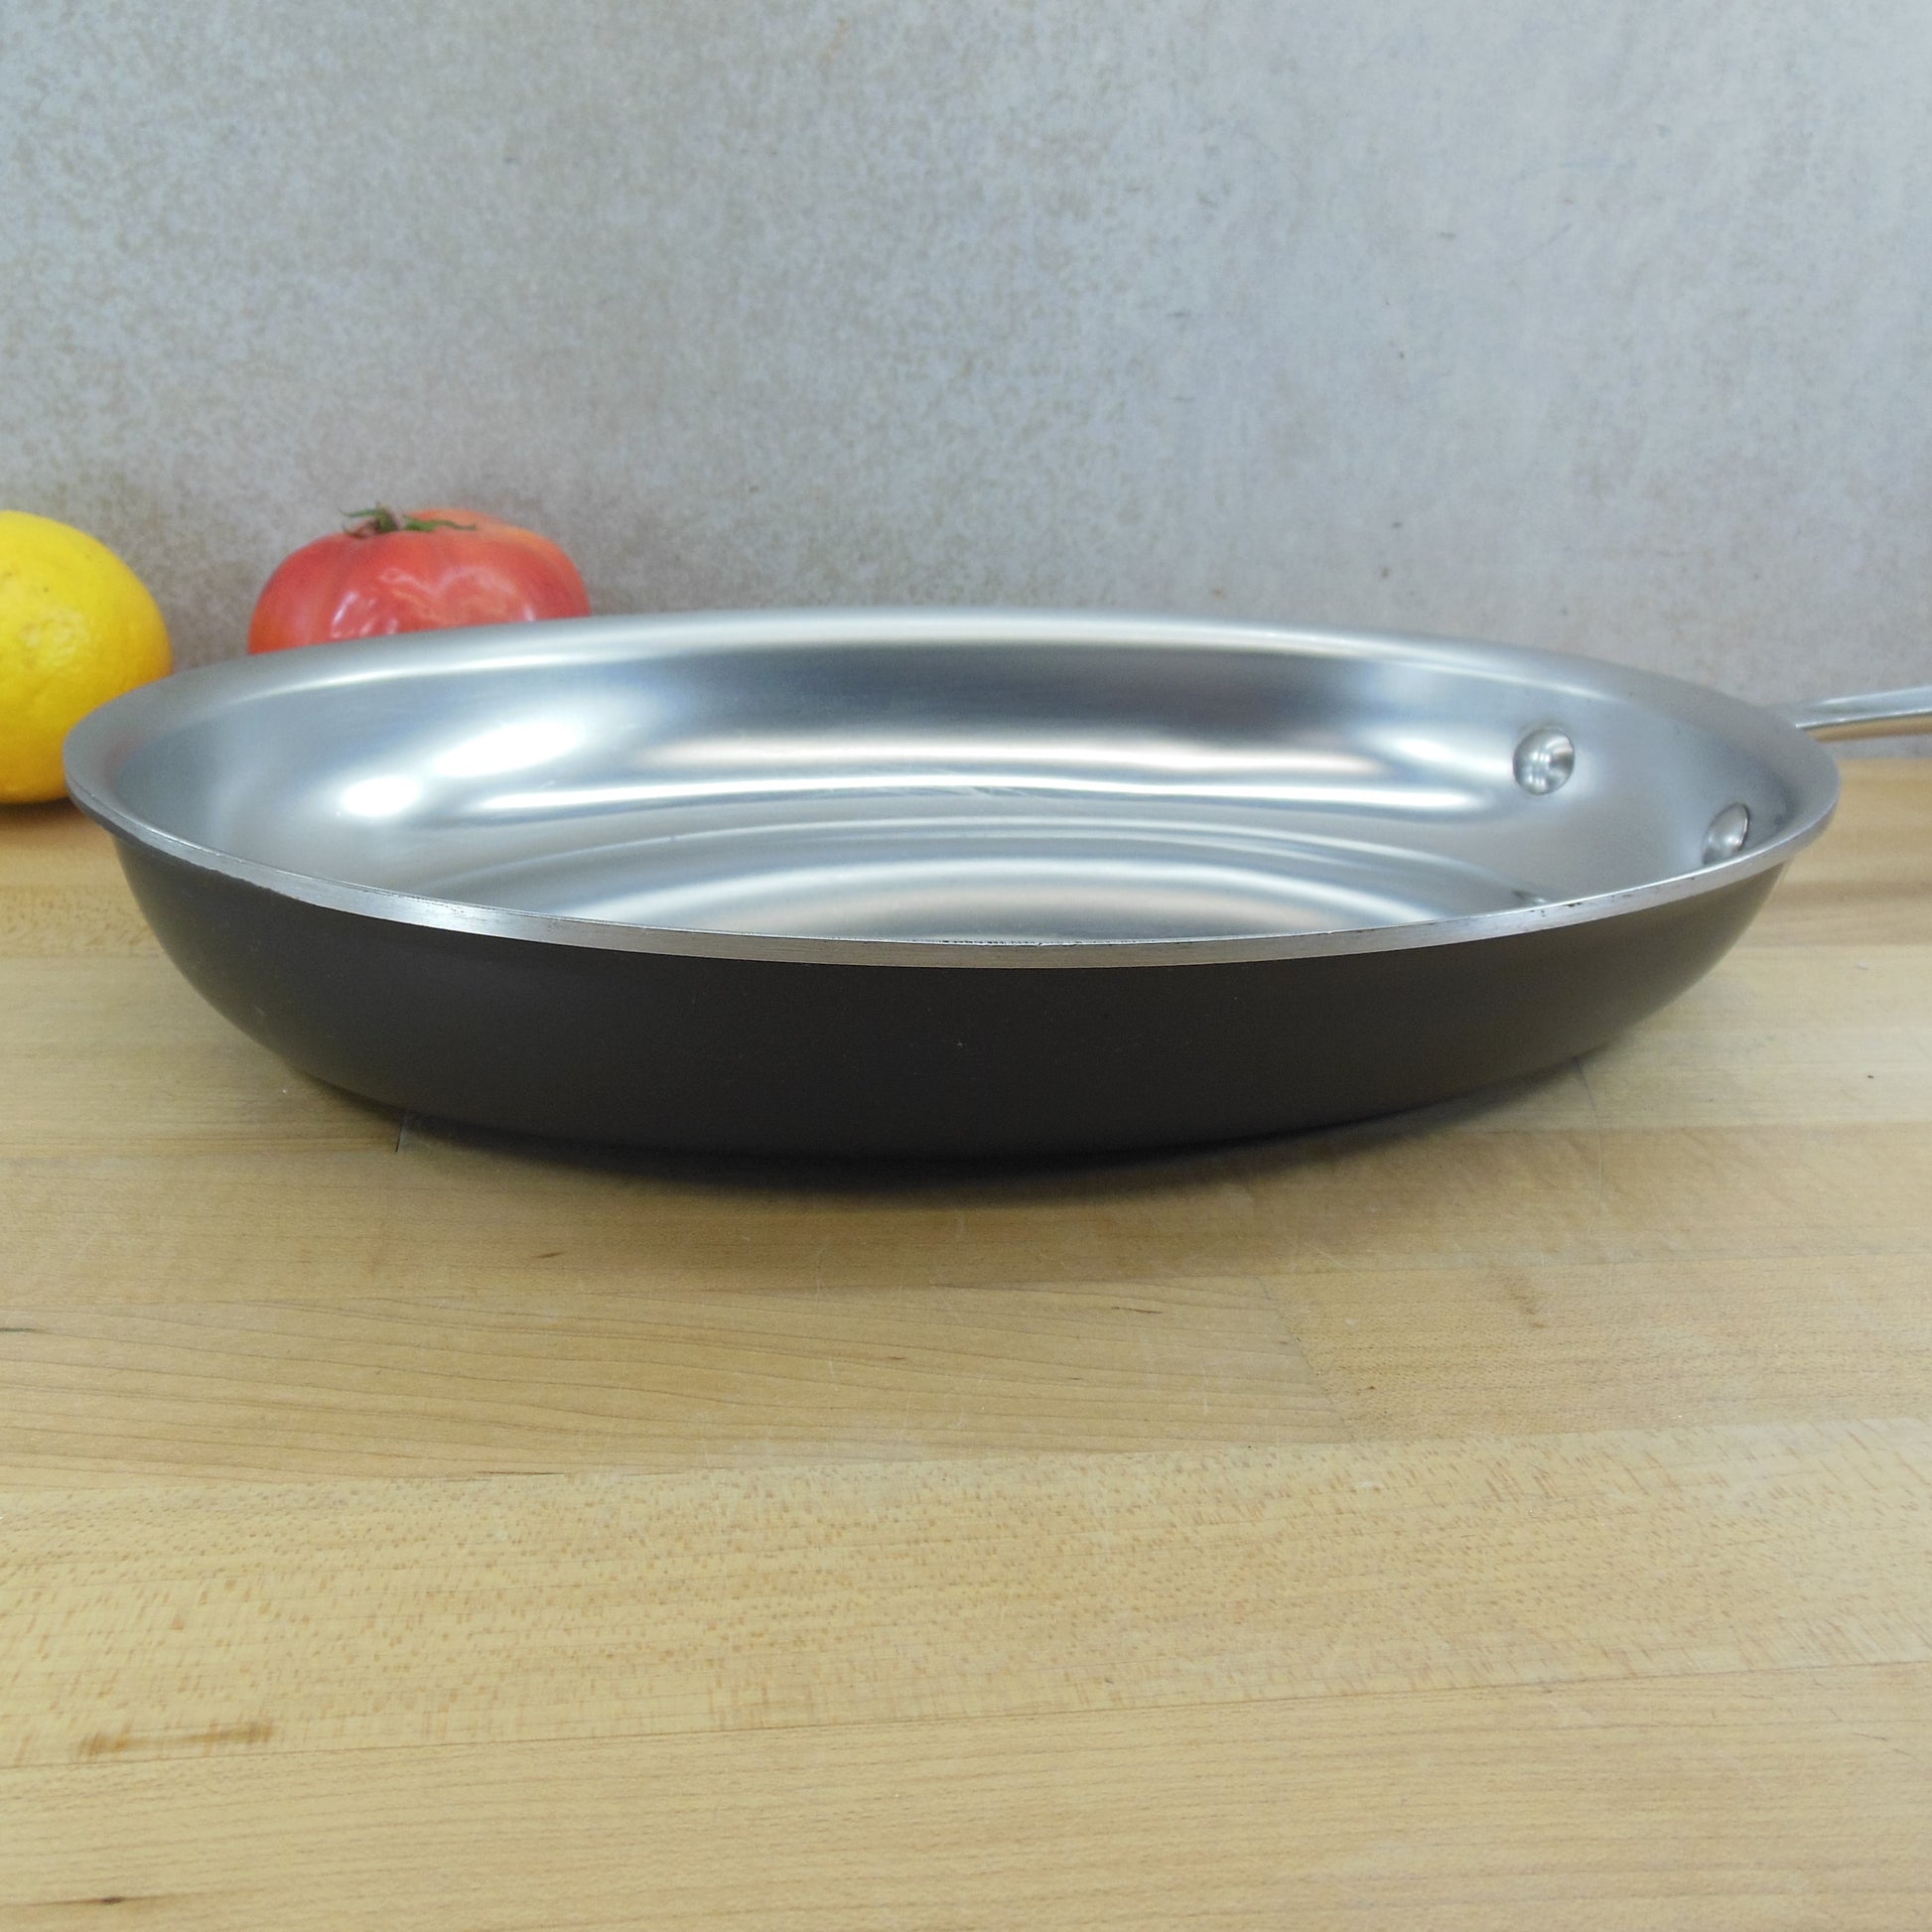 All-Clad Ltd. USA Anodized Stainless Oval Fish Omelet Fry Pan Skillet used